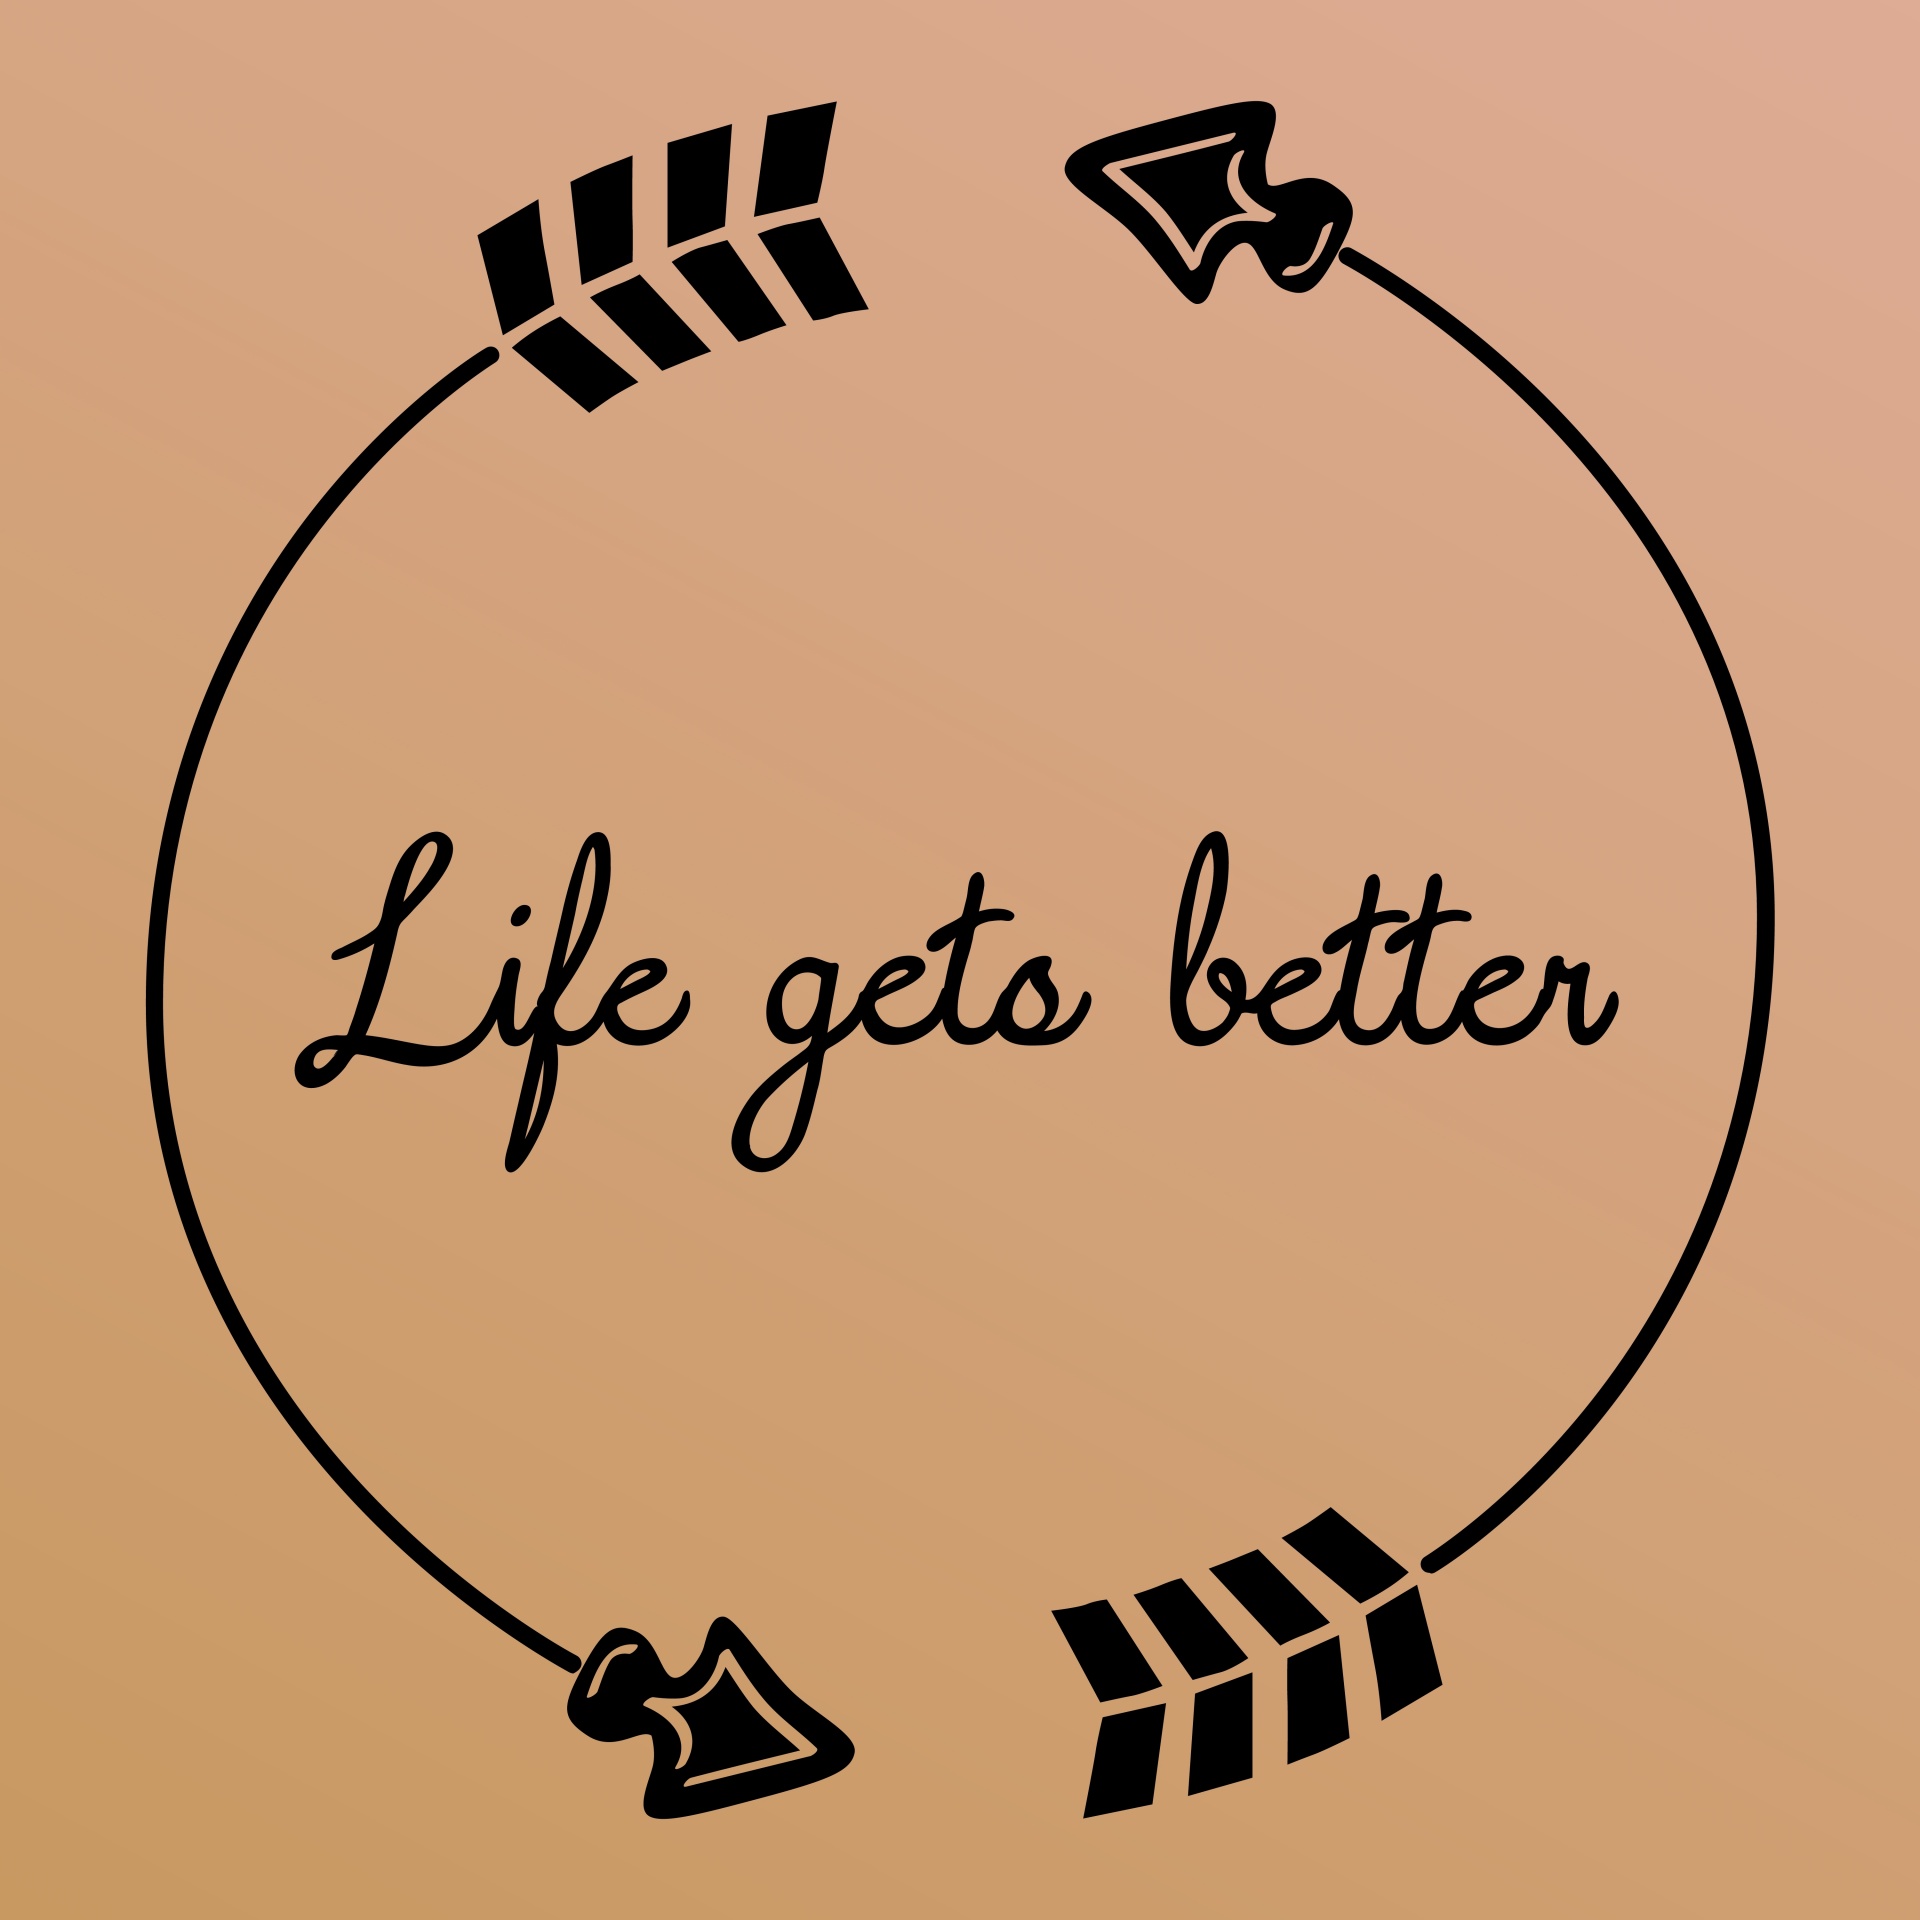 What is better текст. Картинка better. Картинка good Life. The best картинки. Life is getting better.